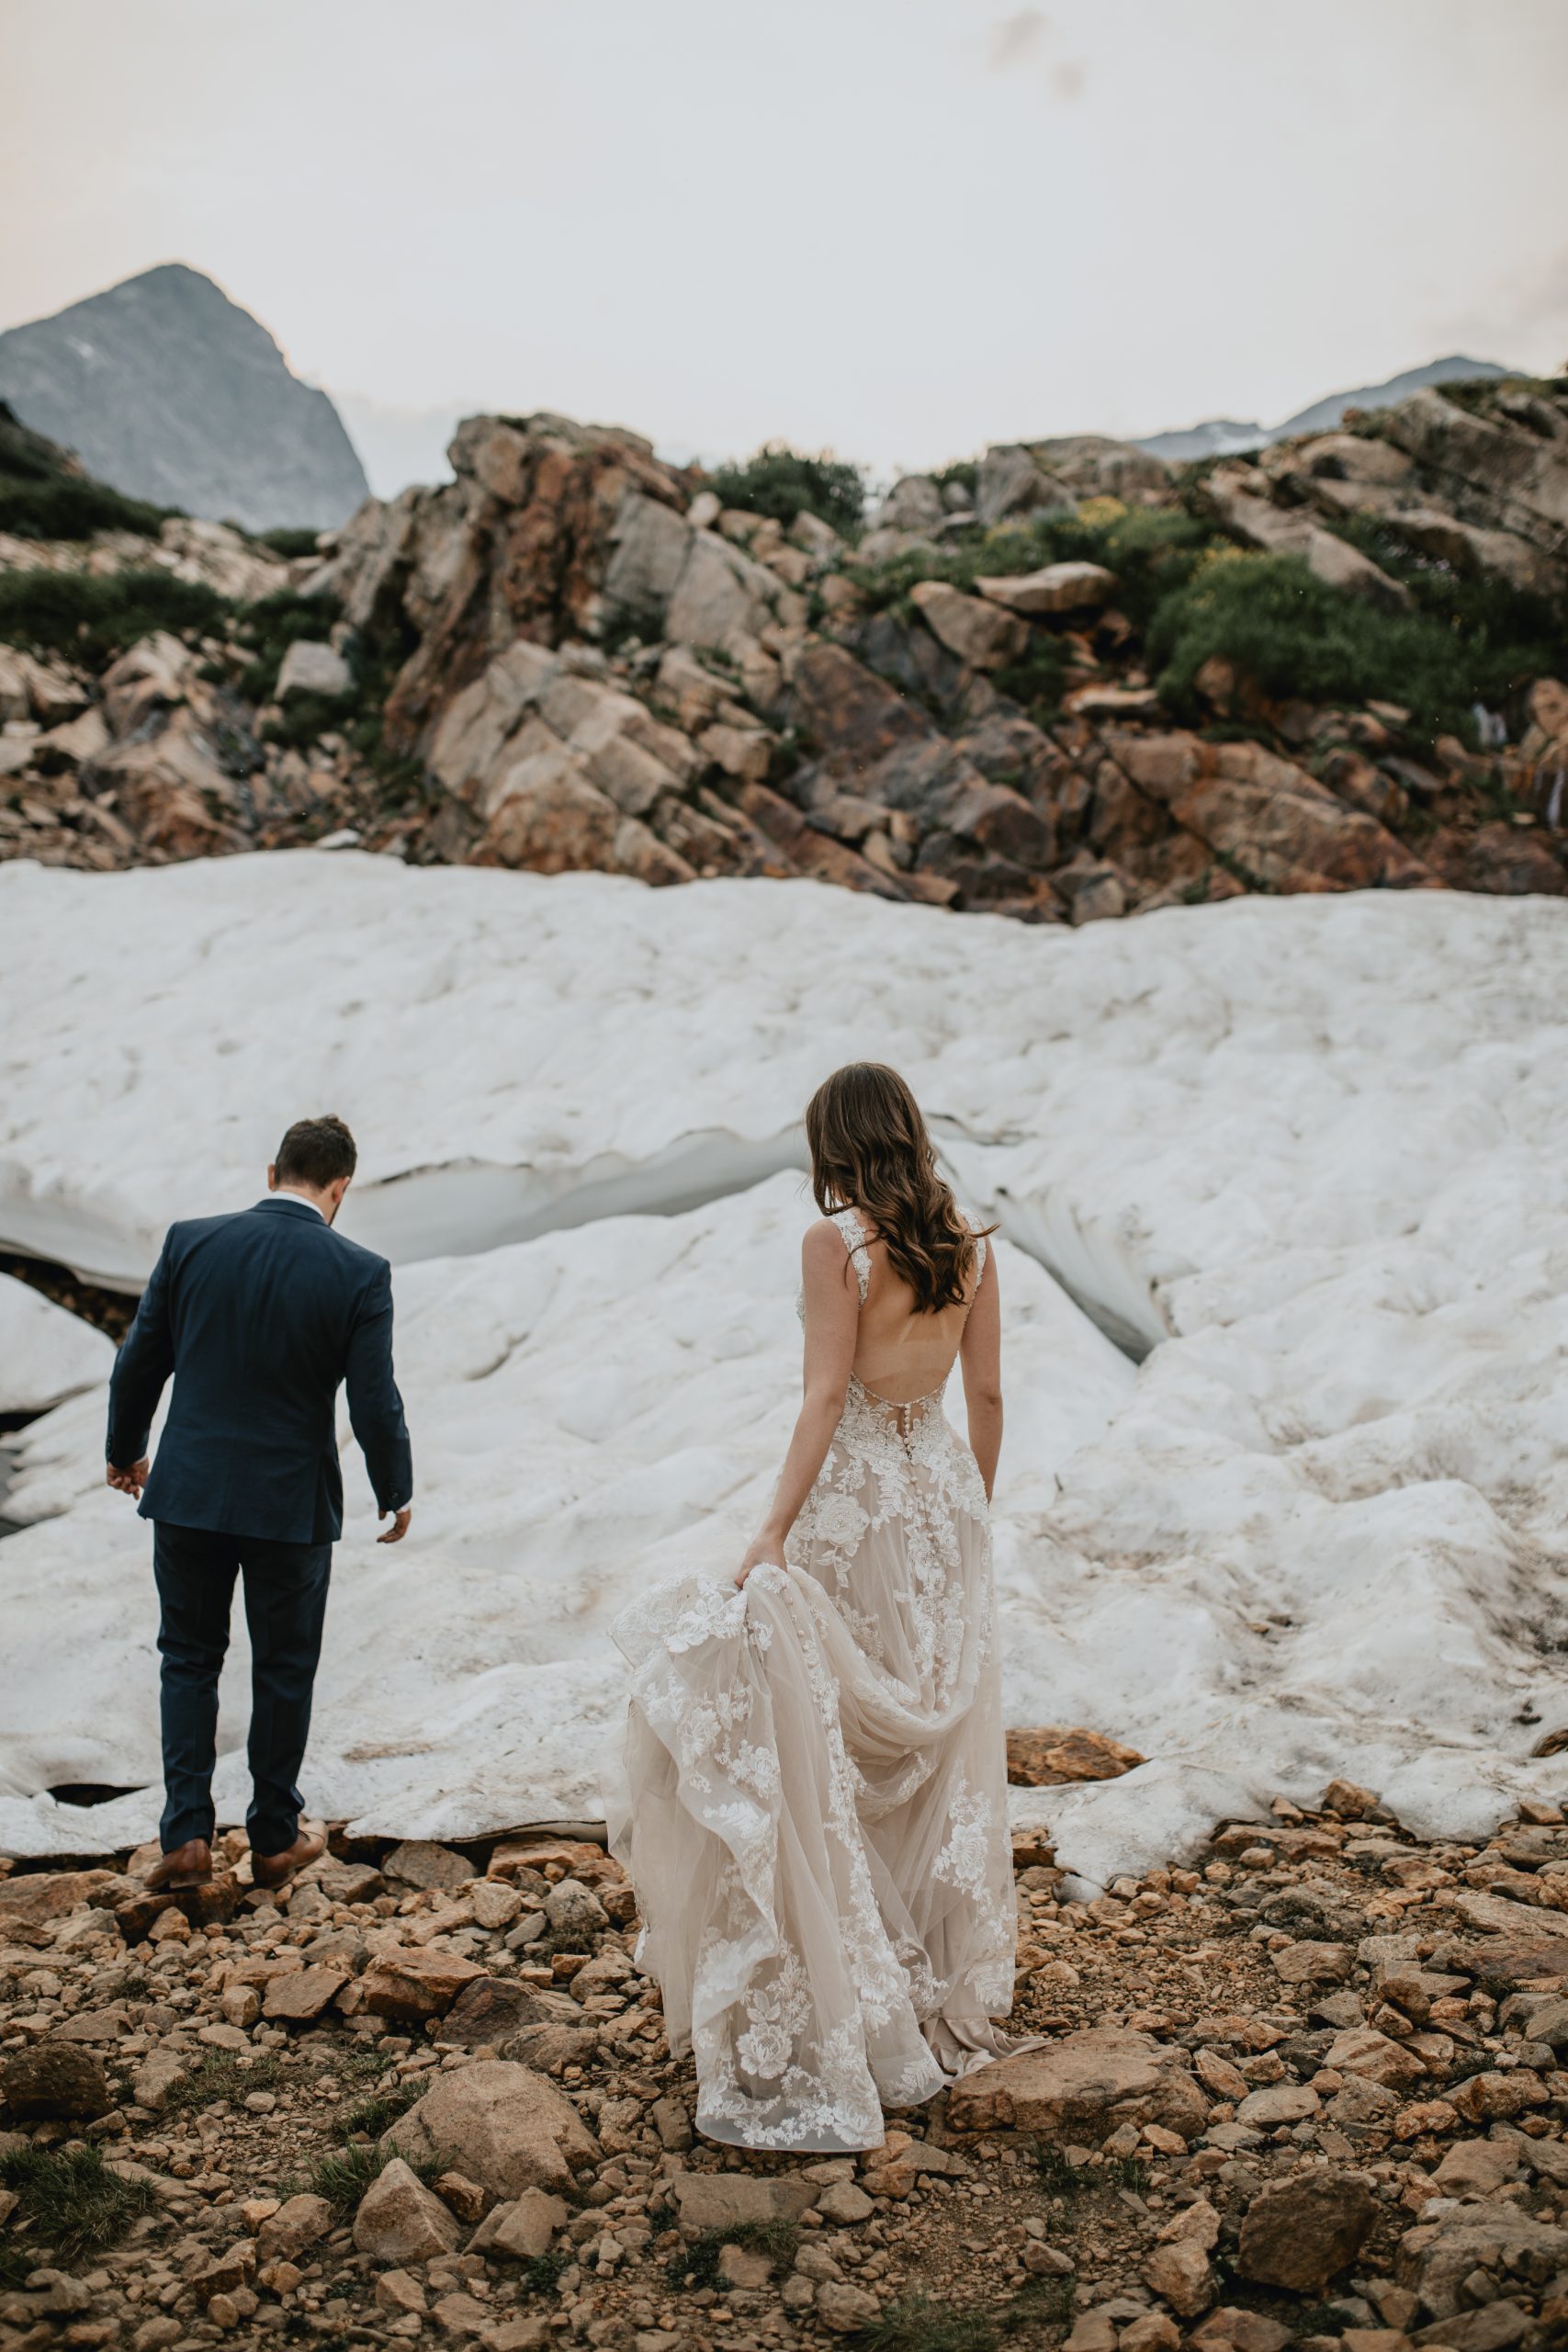 Couple in wedding attire getting married at the top of a mountain